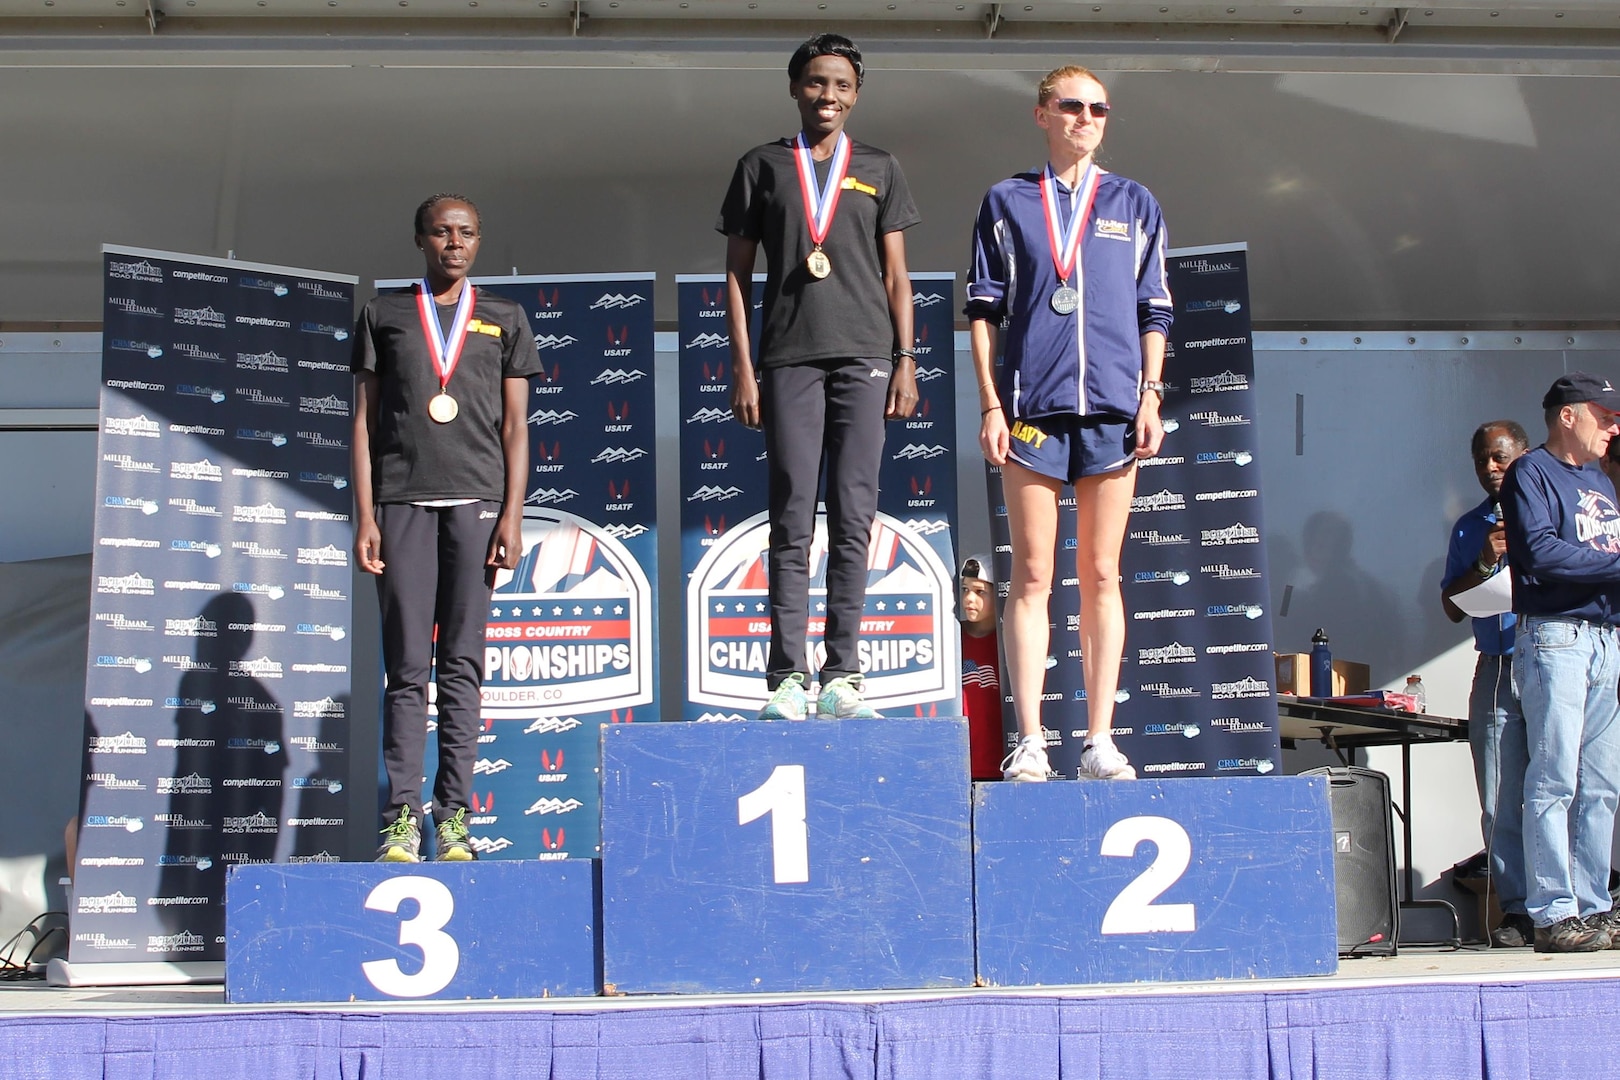 2015 Armed Forces Women medalists.  From left to right: Pfc. Susan Tanui (Army) Fort Riley, Kan.; Spc. Caroline Jepleting (Army) Landstuhl, Germany; Lt. Amanda Rice (Navy) ATSUGI, Japan

The 2015 Armed Forces Cross Country Championship was held conducted in conjunction with the USA Track and Field Winter National Cross Country Championship in Boulder, Colo. on Feb. 7.